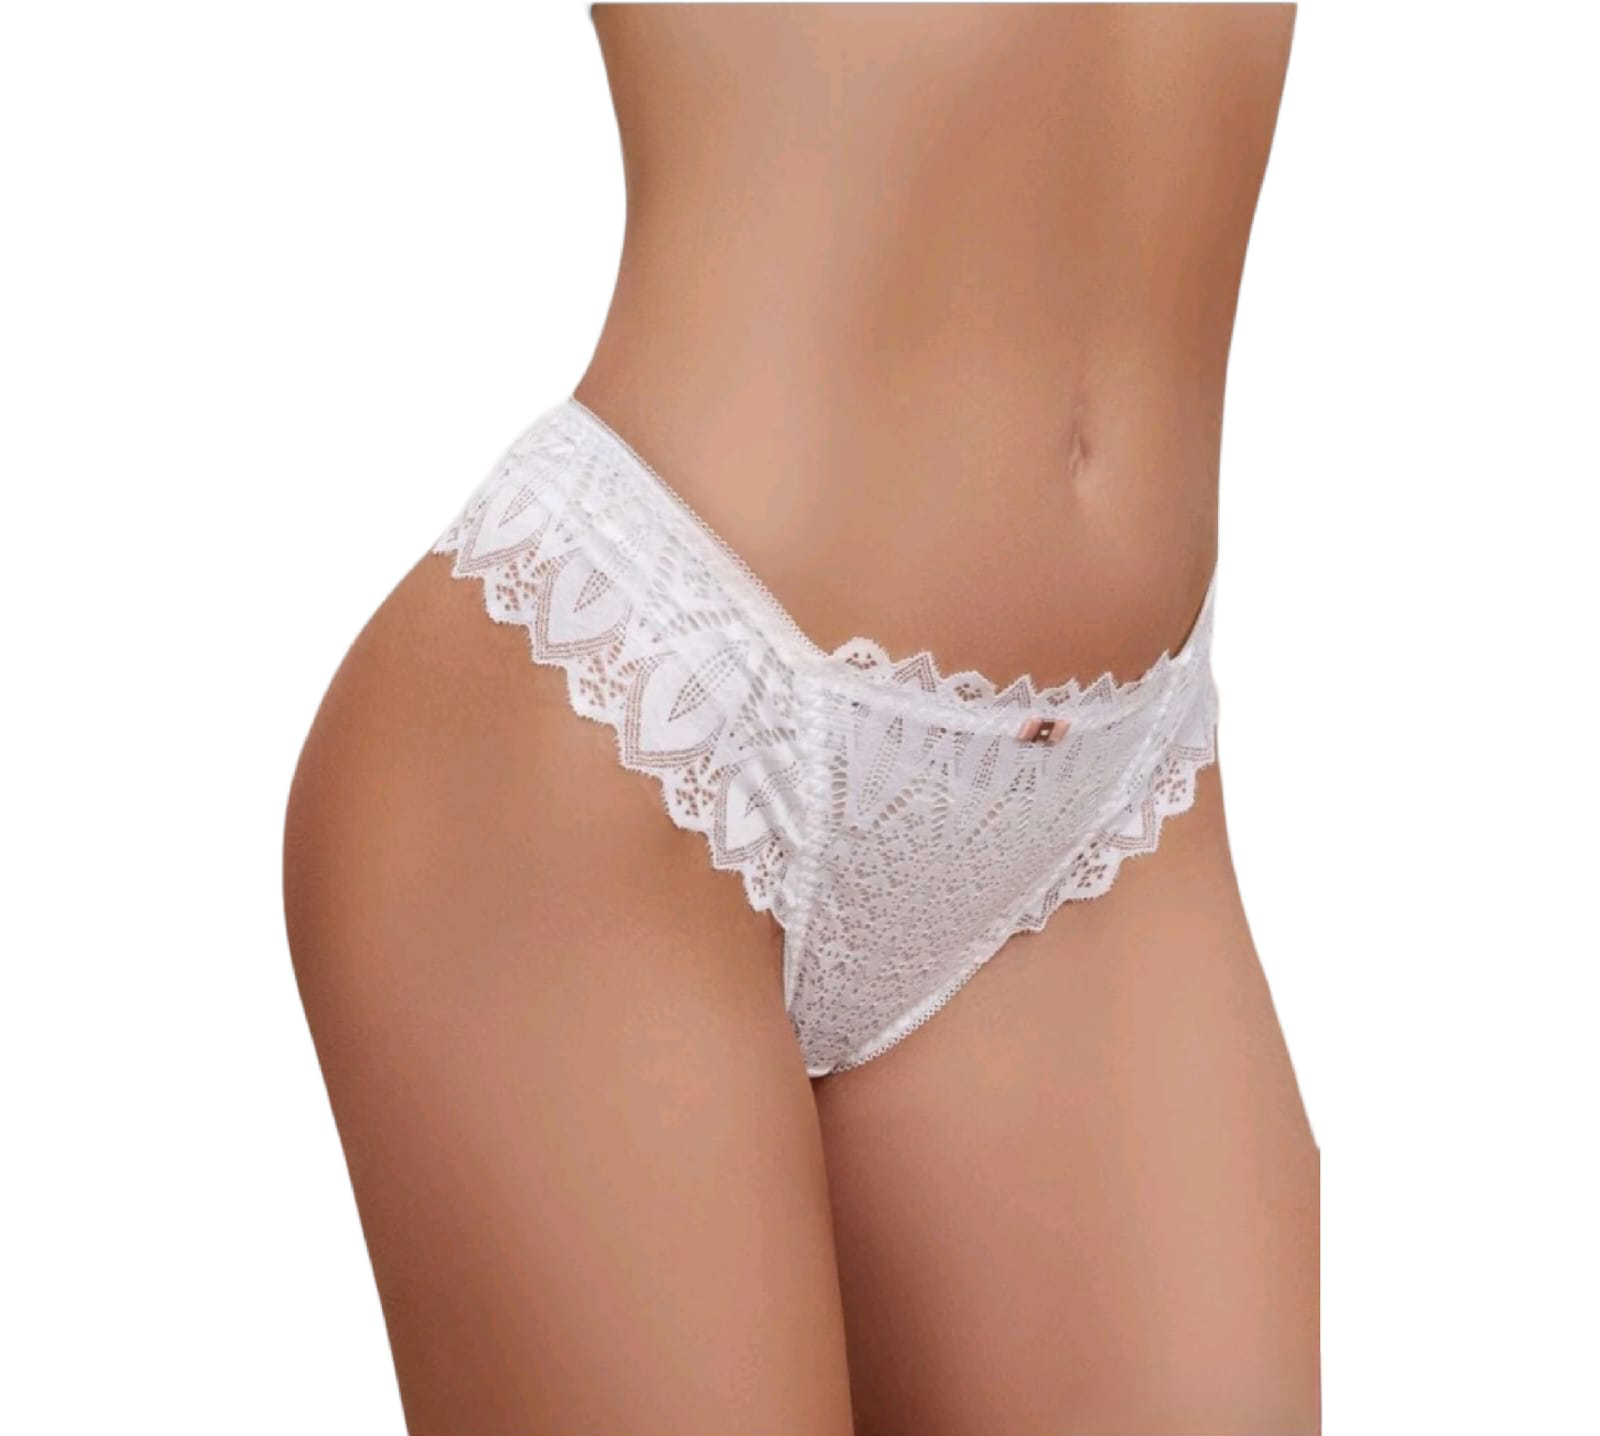 Carries Collection - Floral Lace Underwear Set